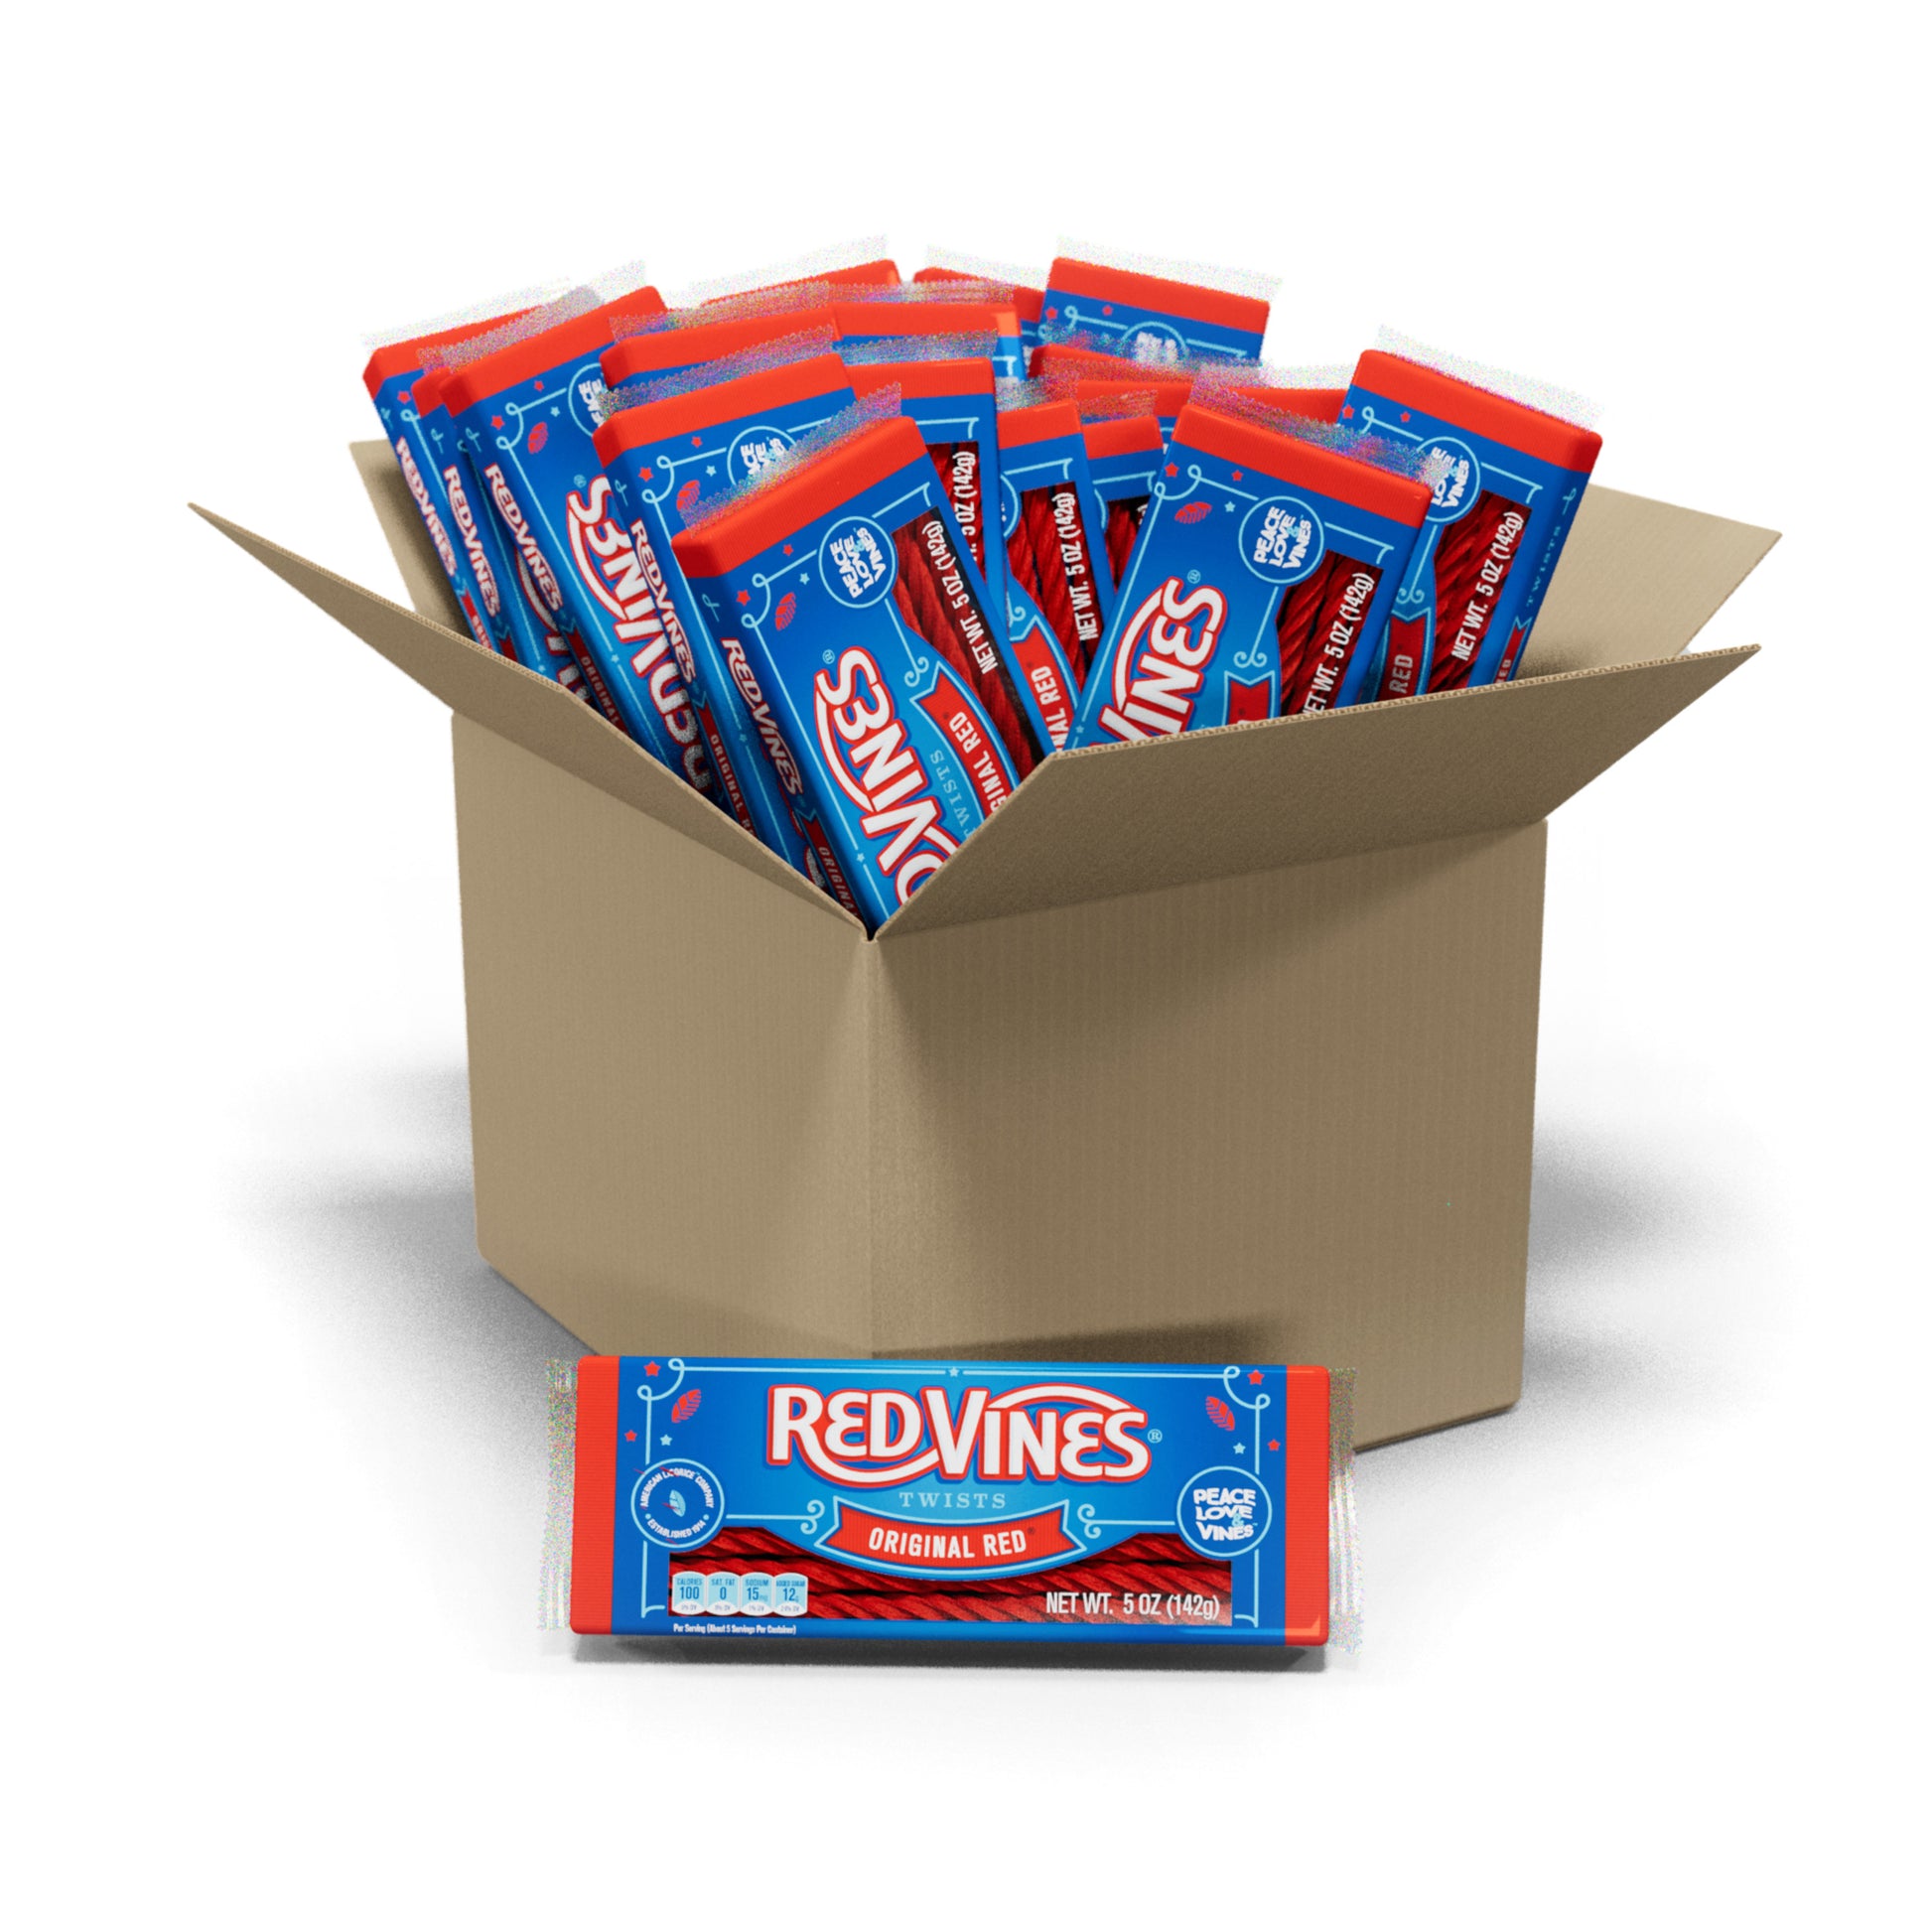 RED VINES Original Red Licorice Twists, 24 pack of 5oz trays